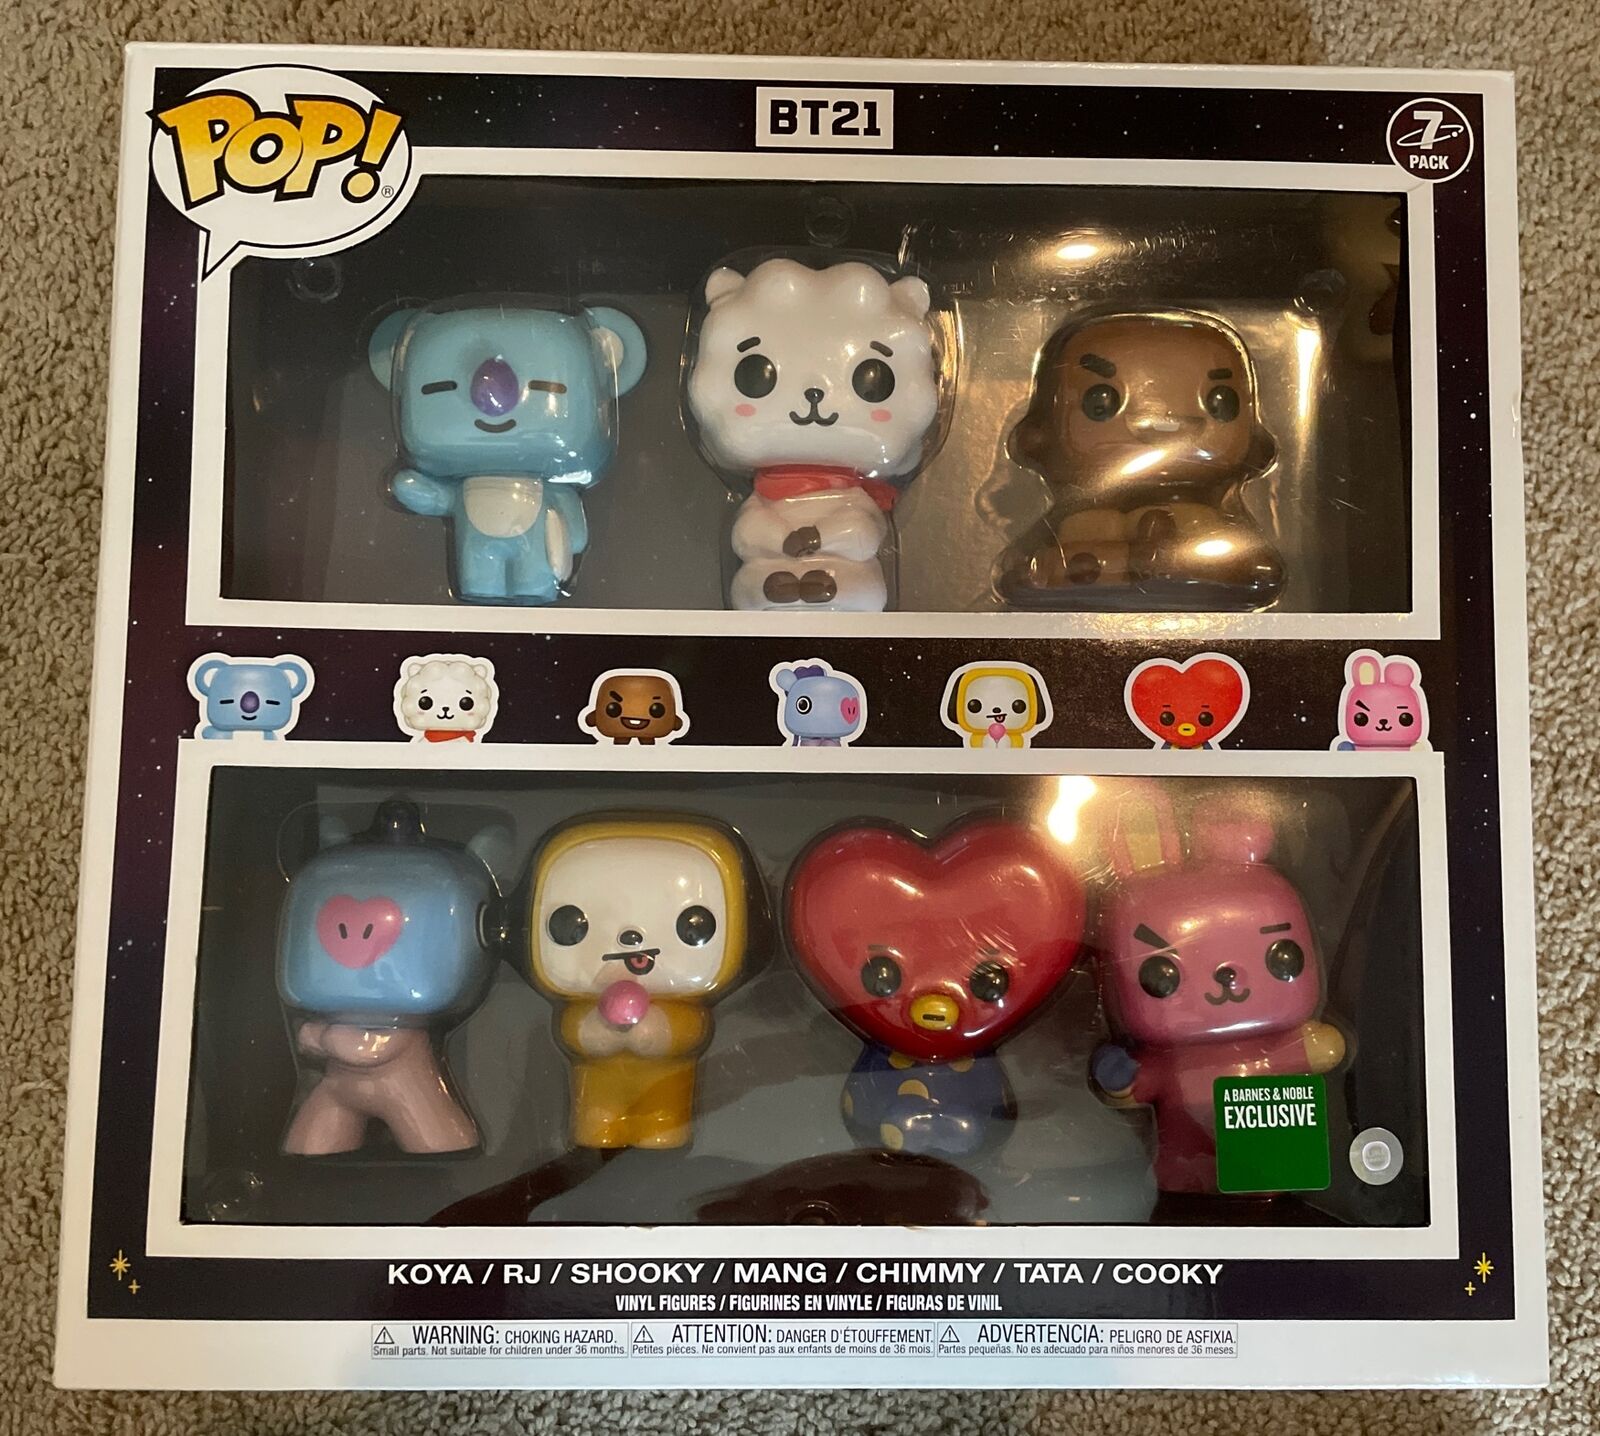 BT21 7 Pack Funko Pop Barnes & Noble Exclusive Chimmy Tata Cooky RJ Brand New